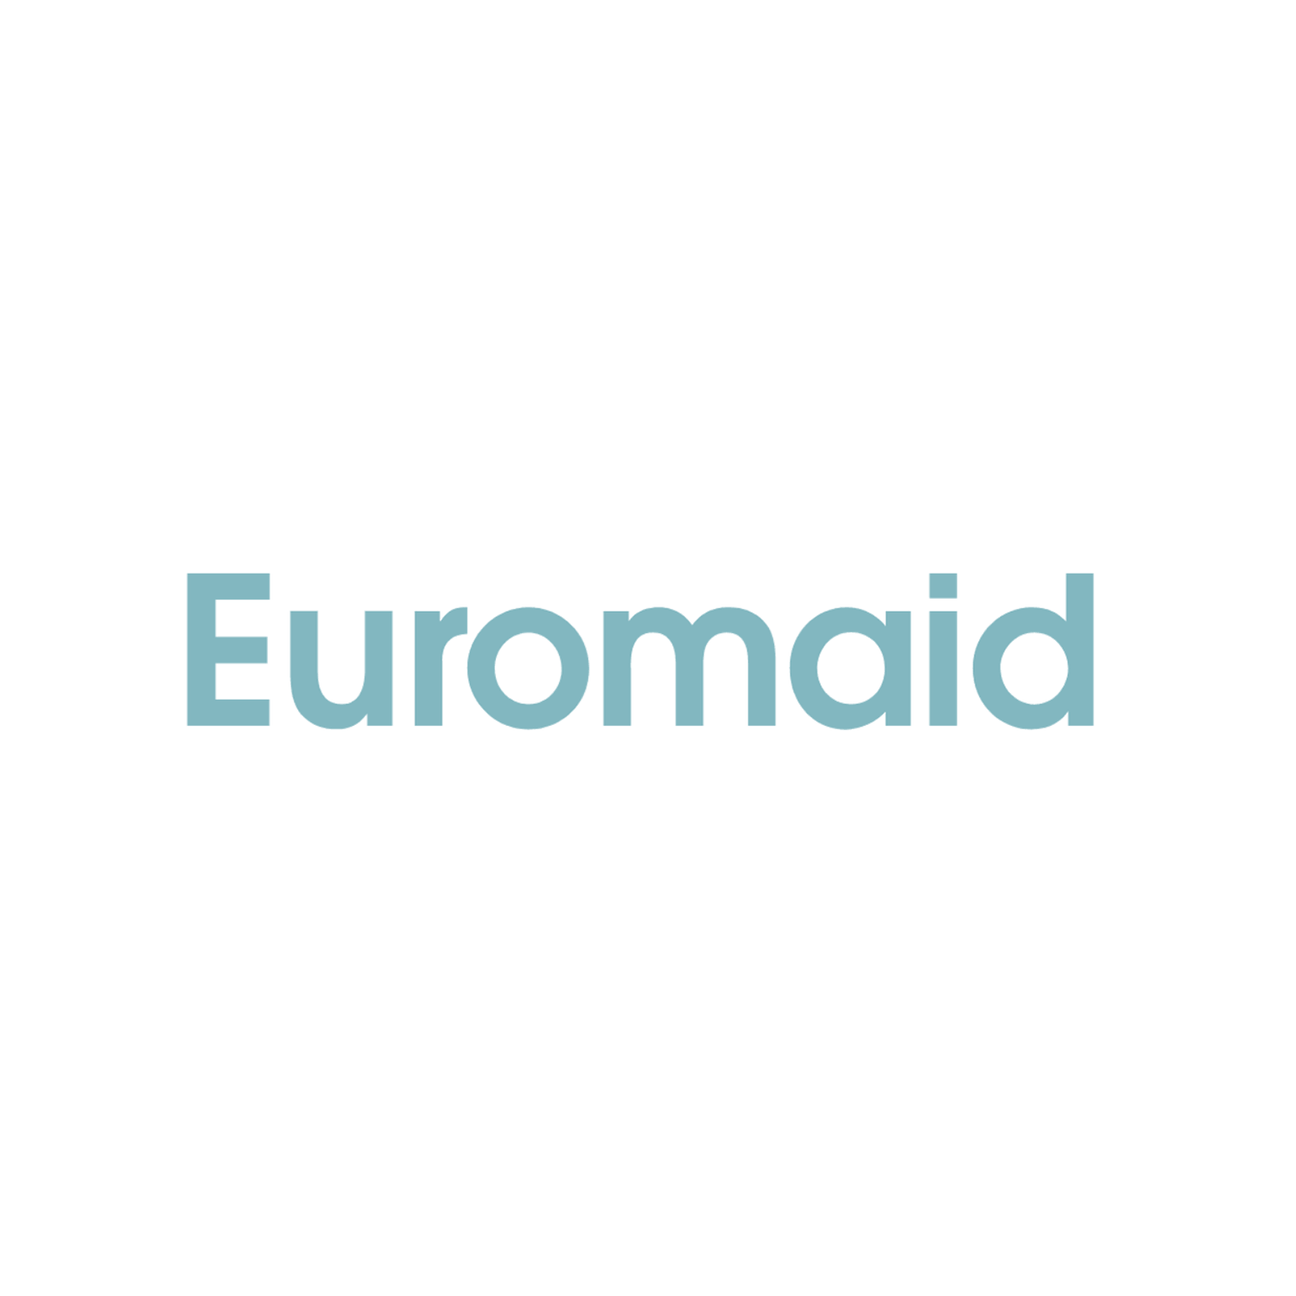 Euromaid Washing Machine Parts - My Oven Spares